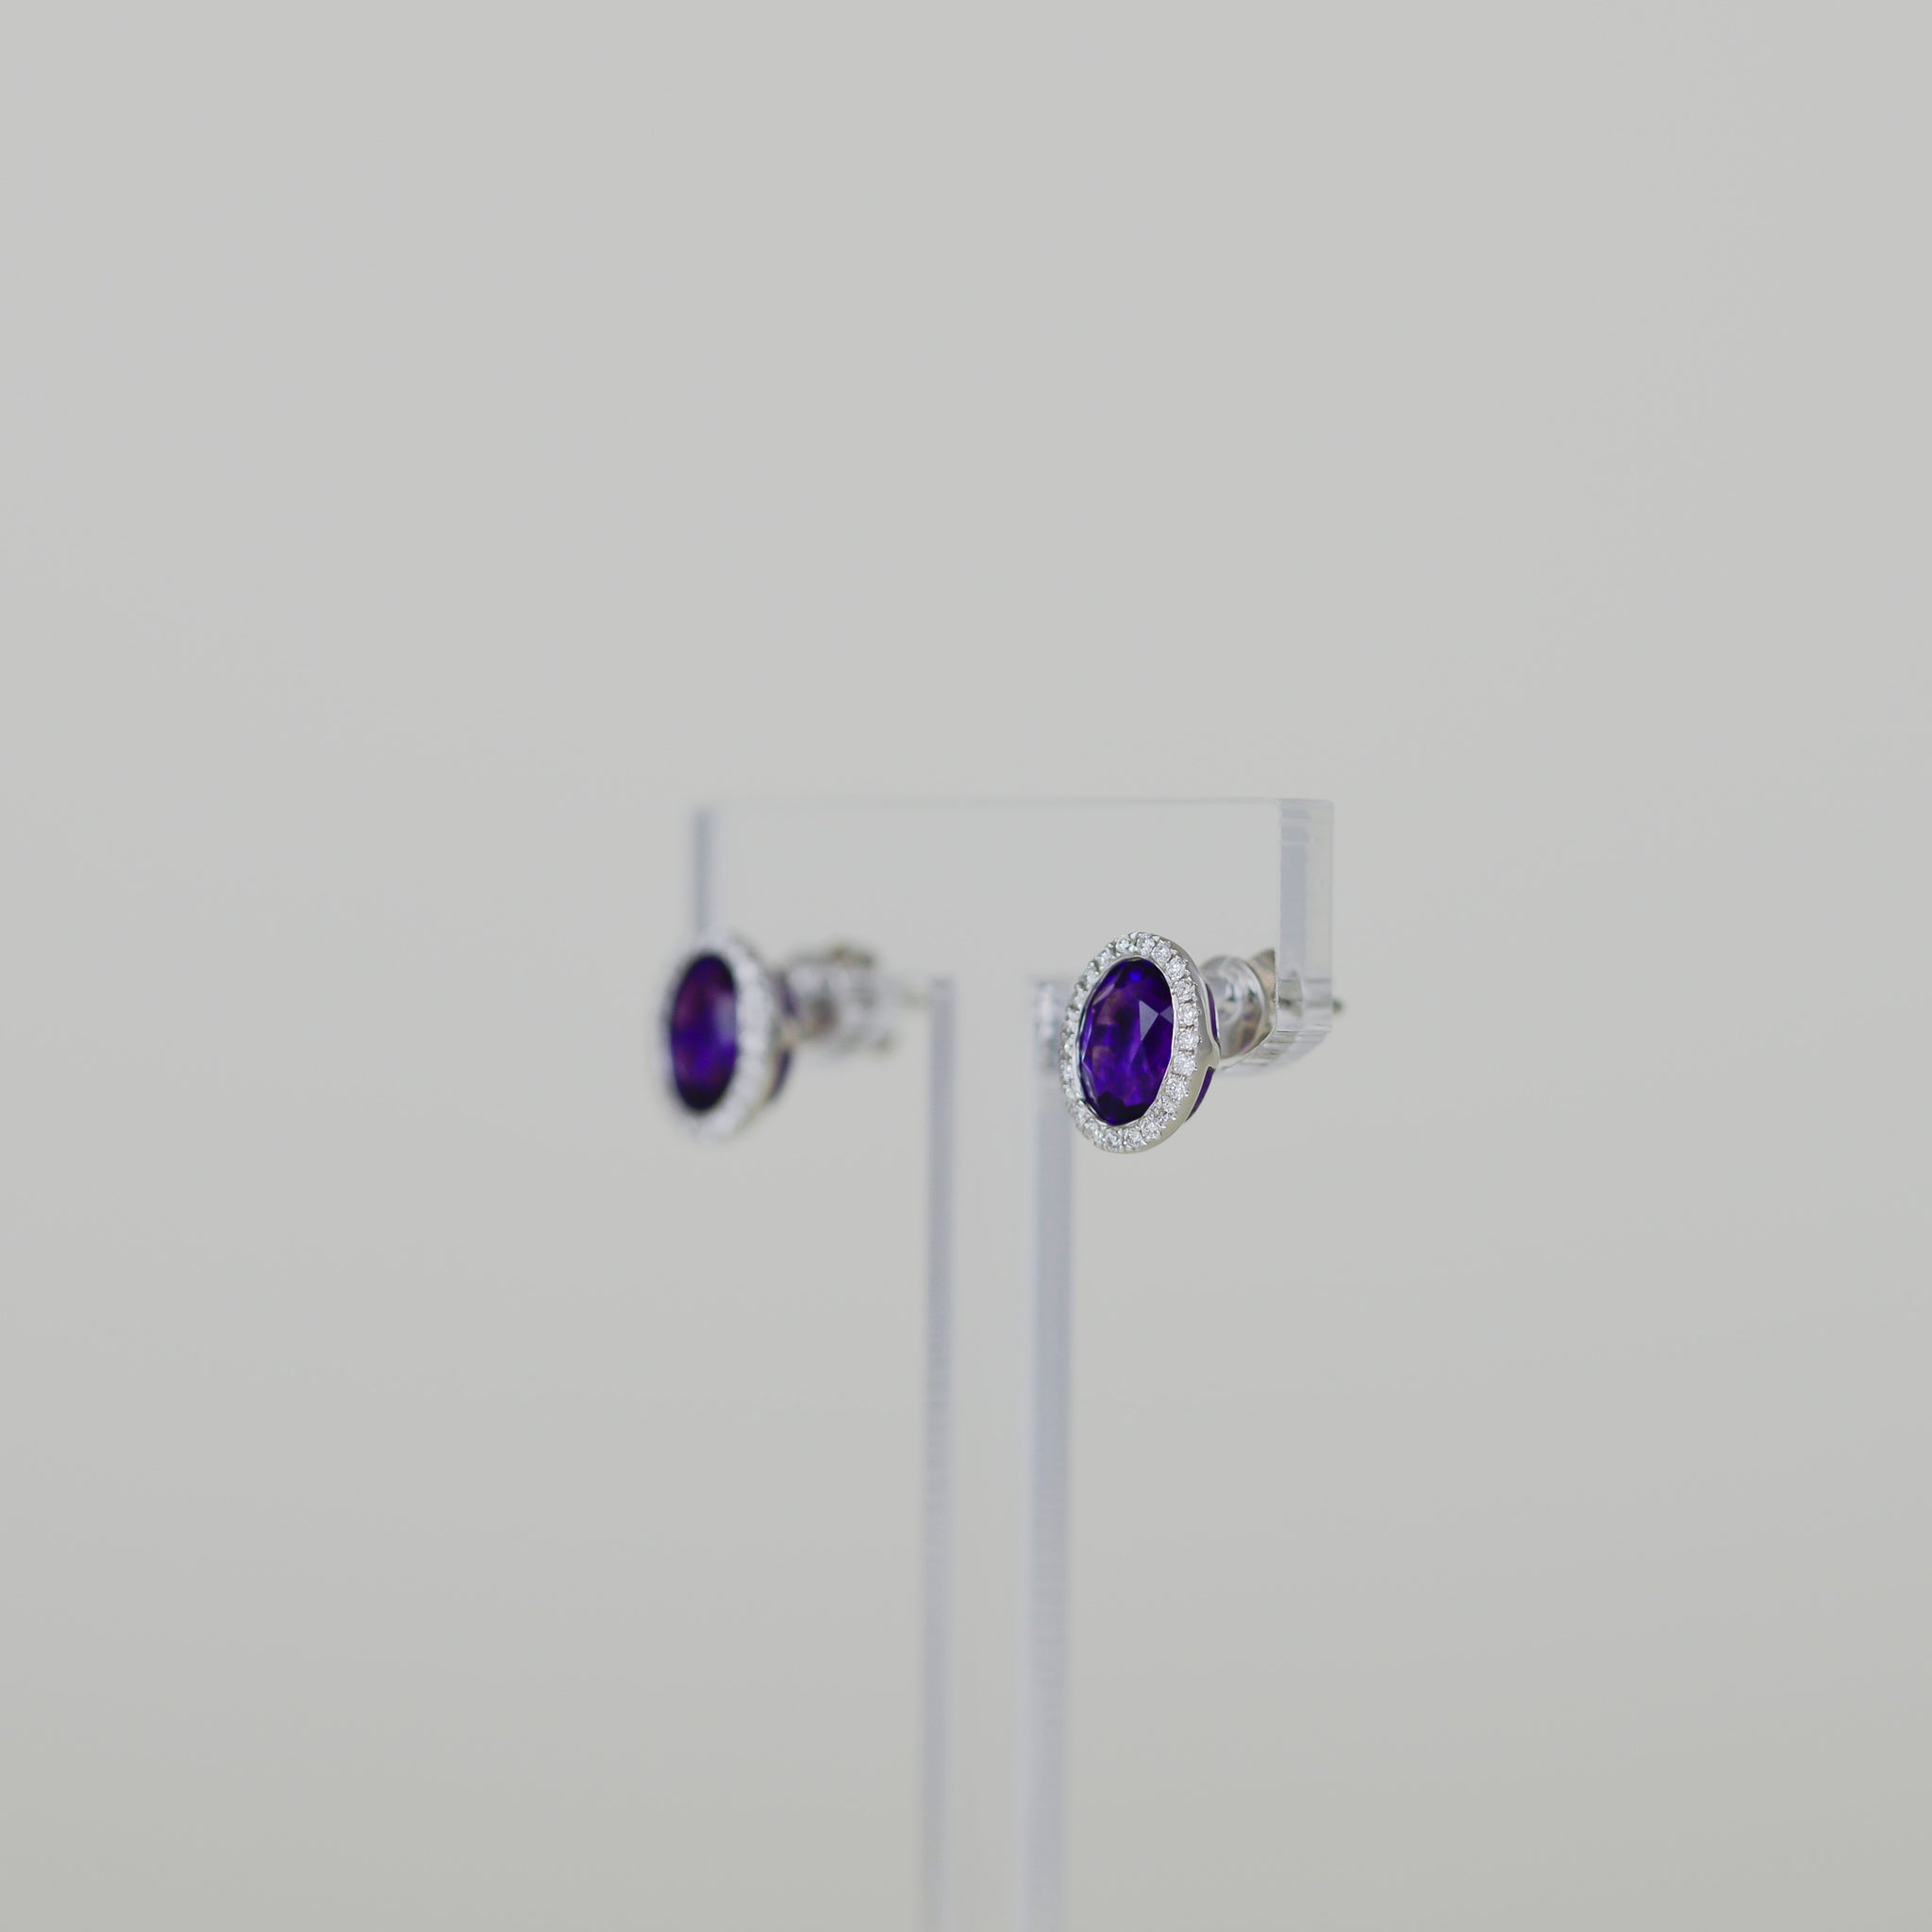 9ct White Gold 1.54ct Oval Amethyst an Diamond Halo Earrings